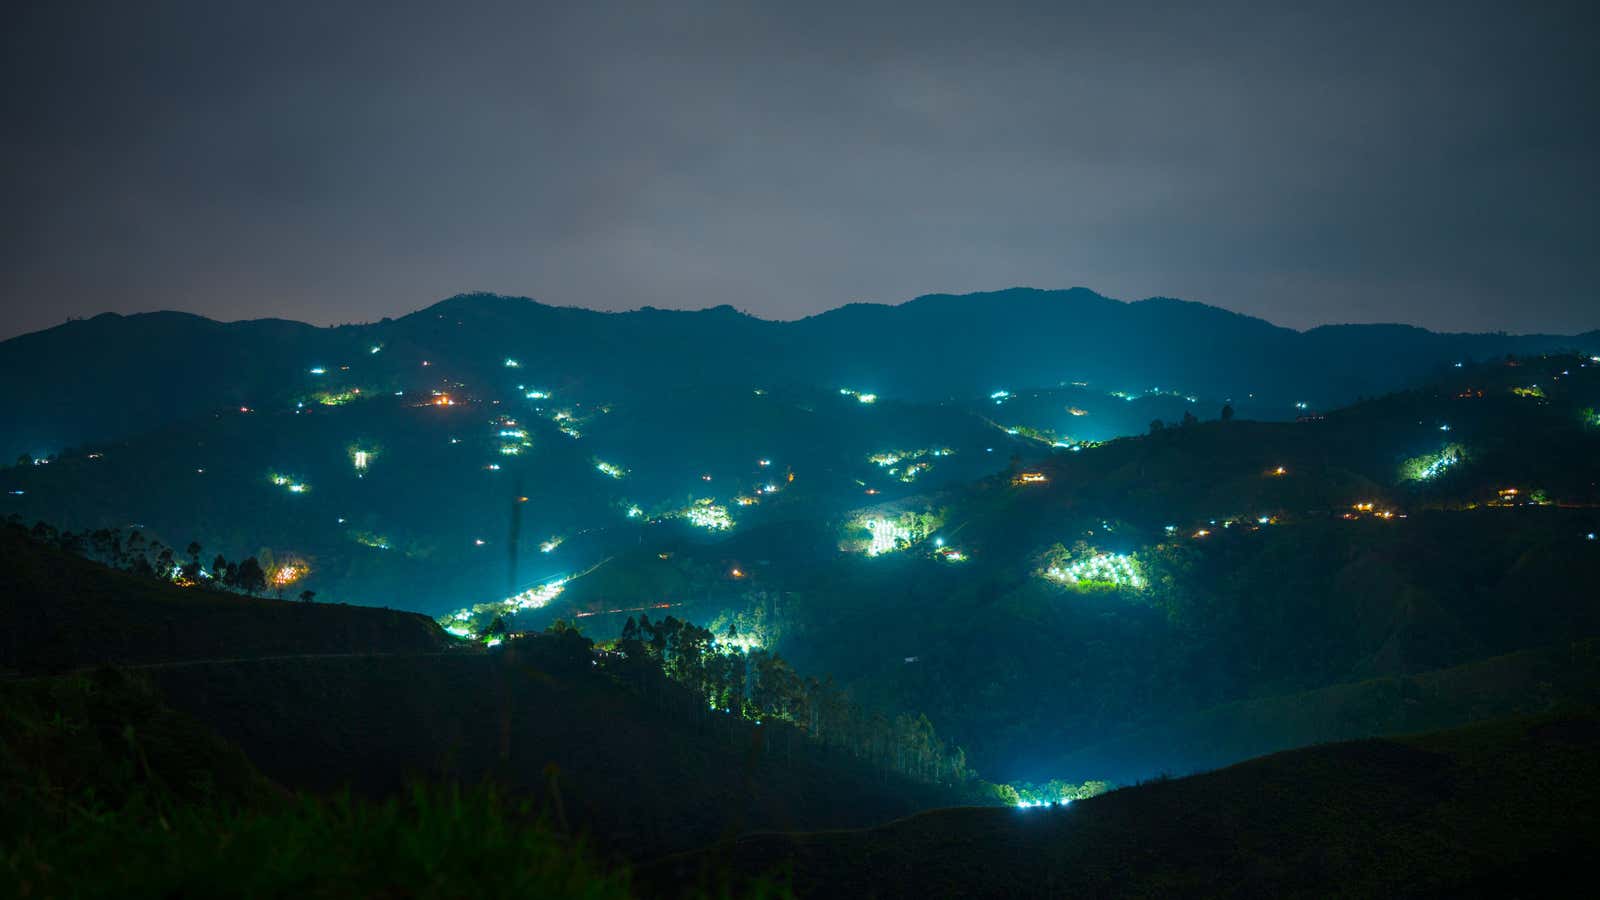 Marijuana farmers have hooked up their illegal plantations to the grid to provide the constant light they need to grow.